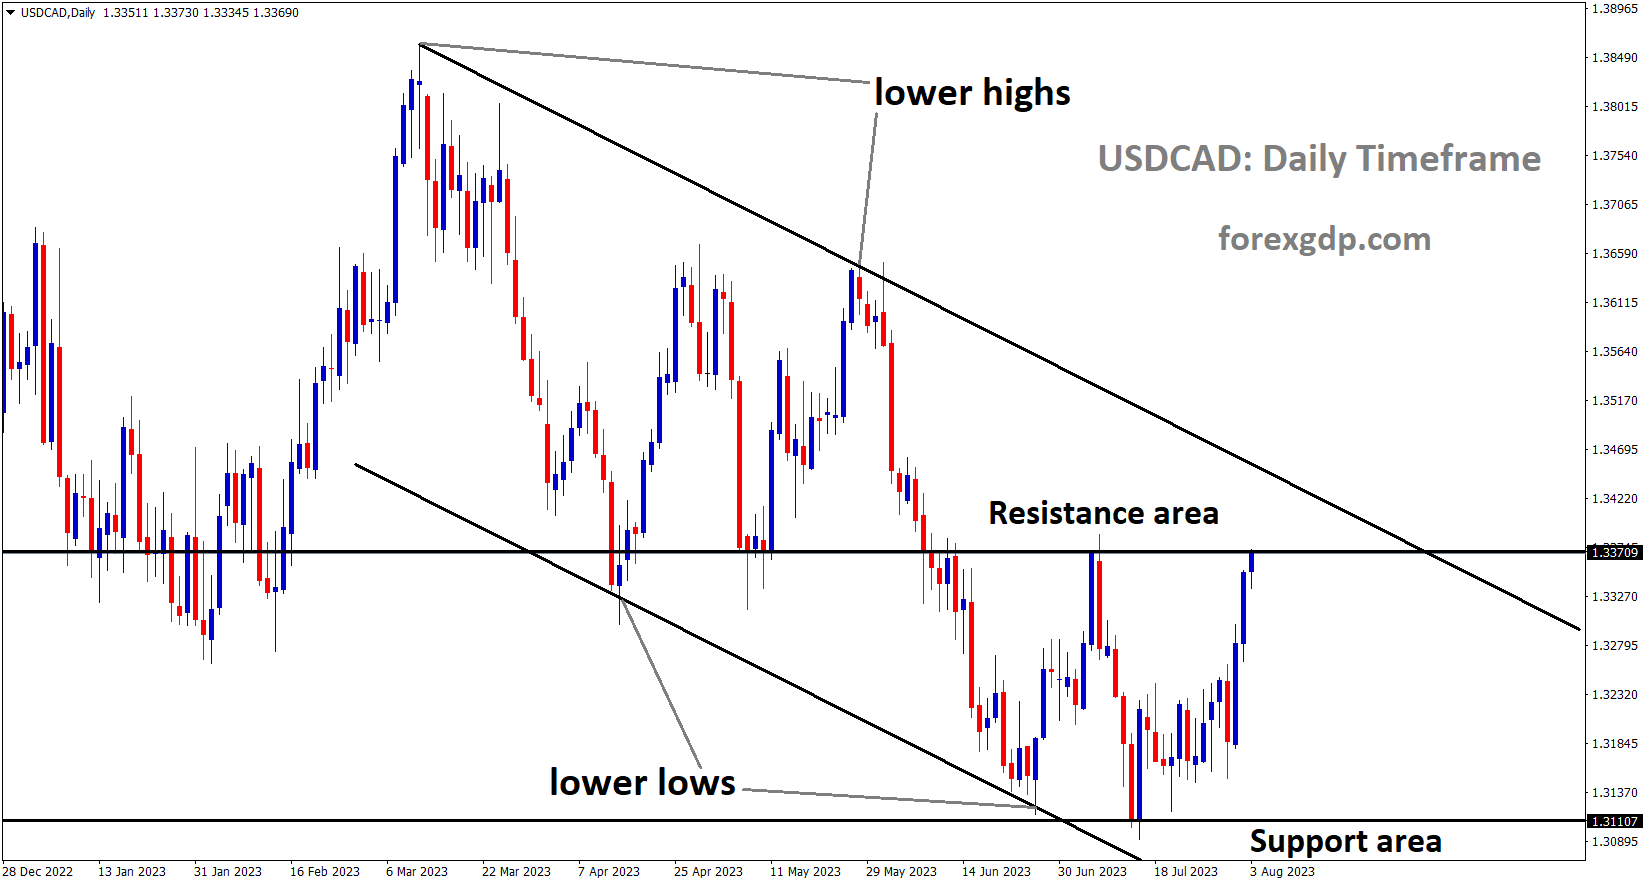 USDCAD is moving in the Descending channel and the market has reached the resistance area of the minor Box pattern inside the channel